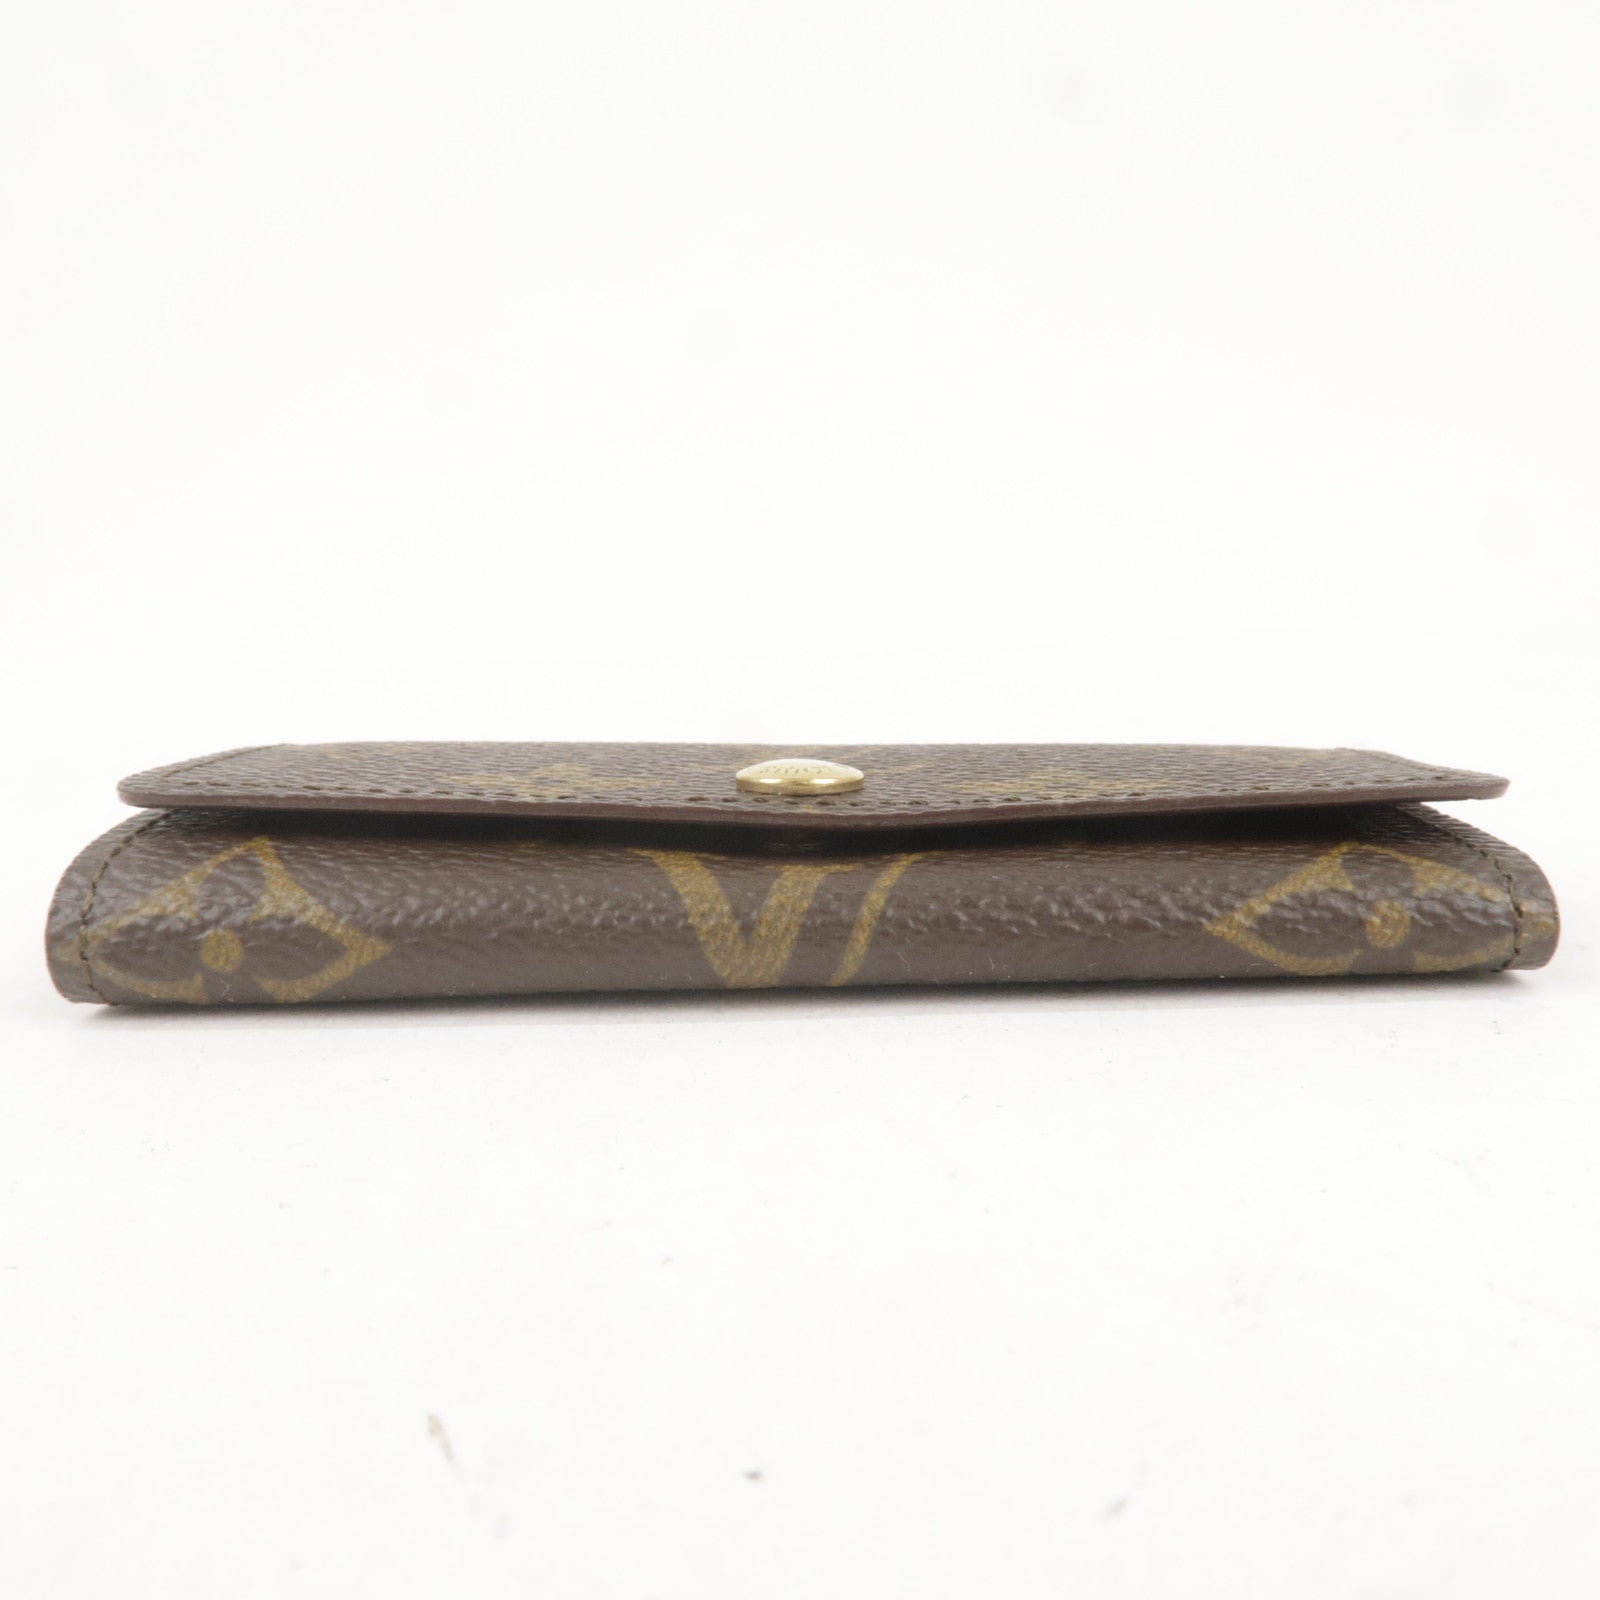 Louis Vuitton Double V Compact Wallet Leather With Monogram Canvas